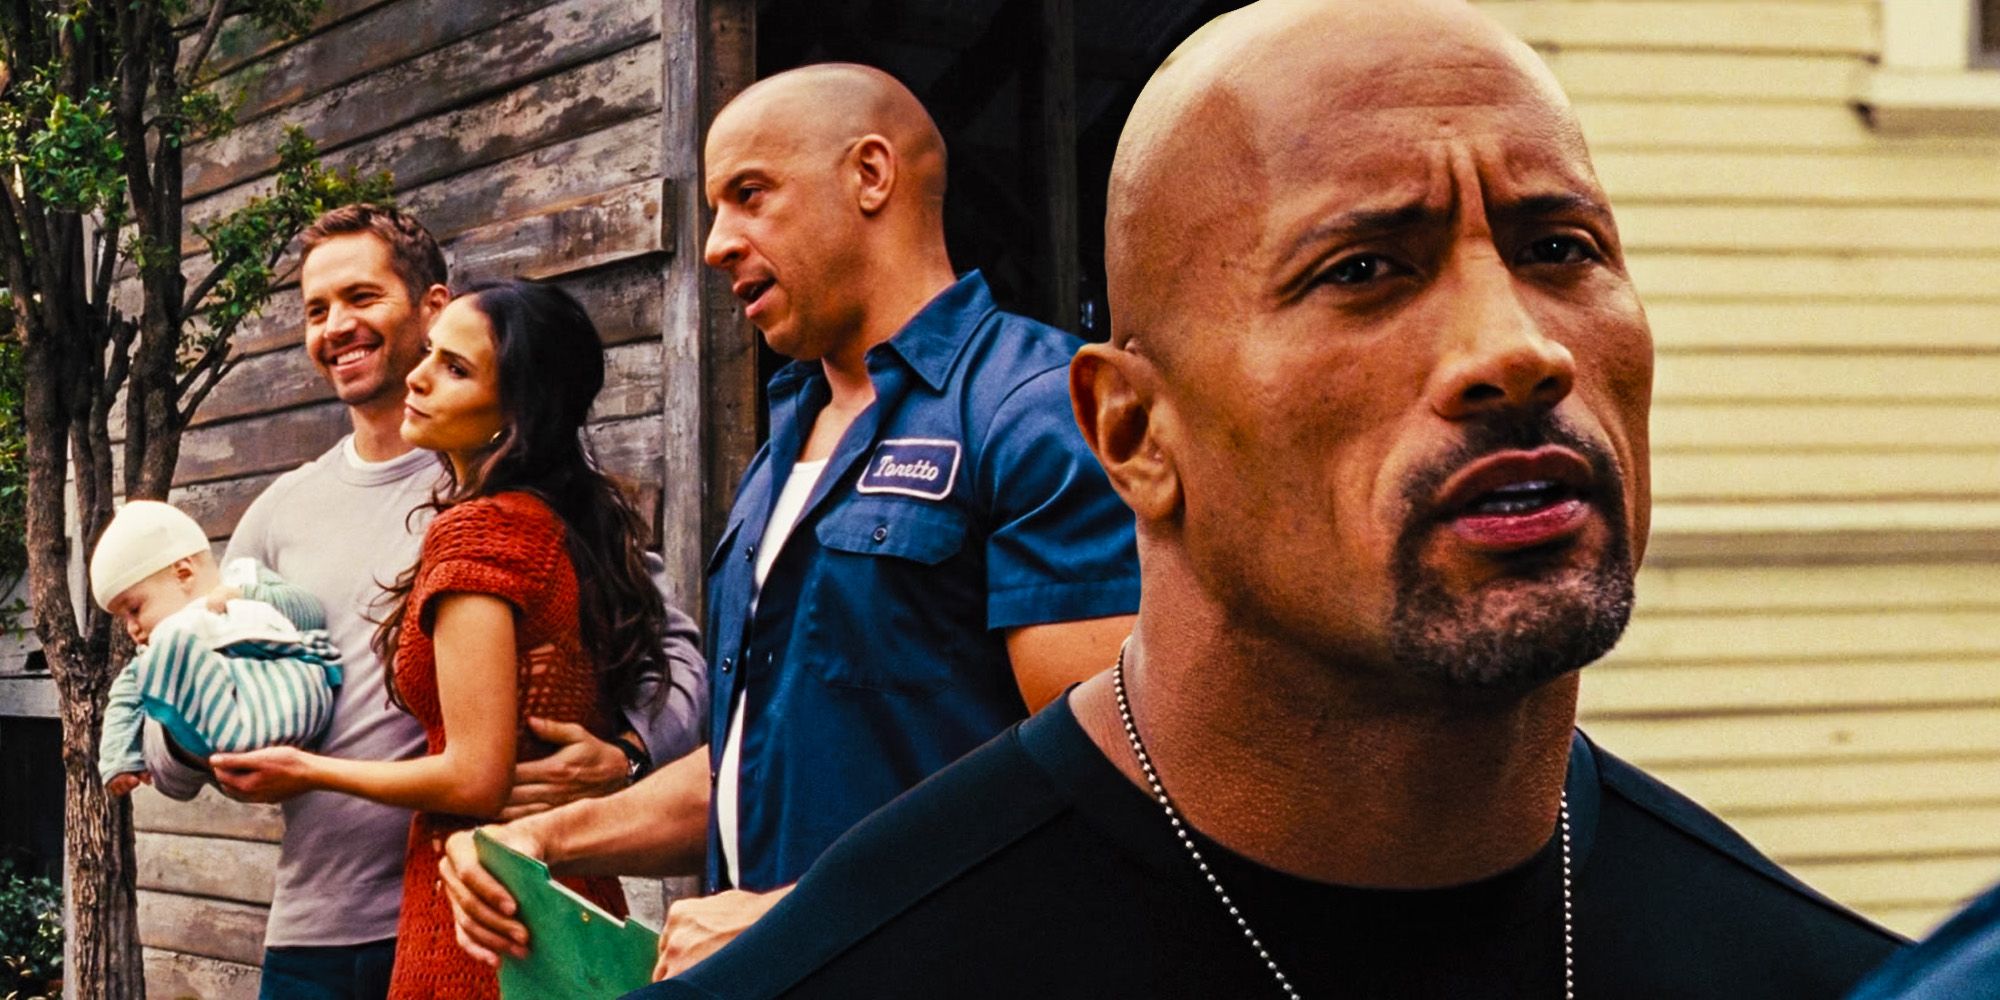 Brian, Mia, Toretto and Hobbs in Fast and Furious